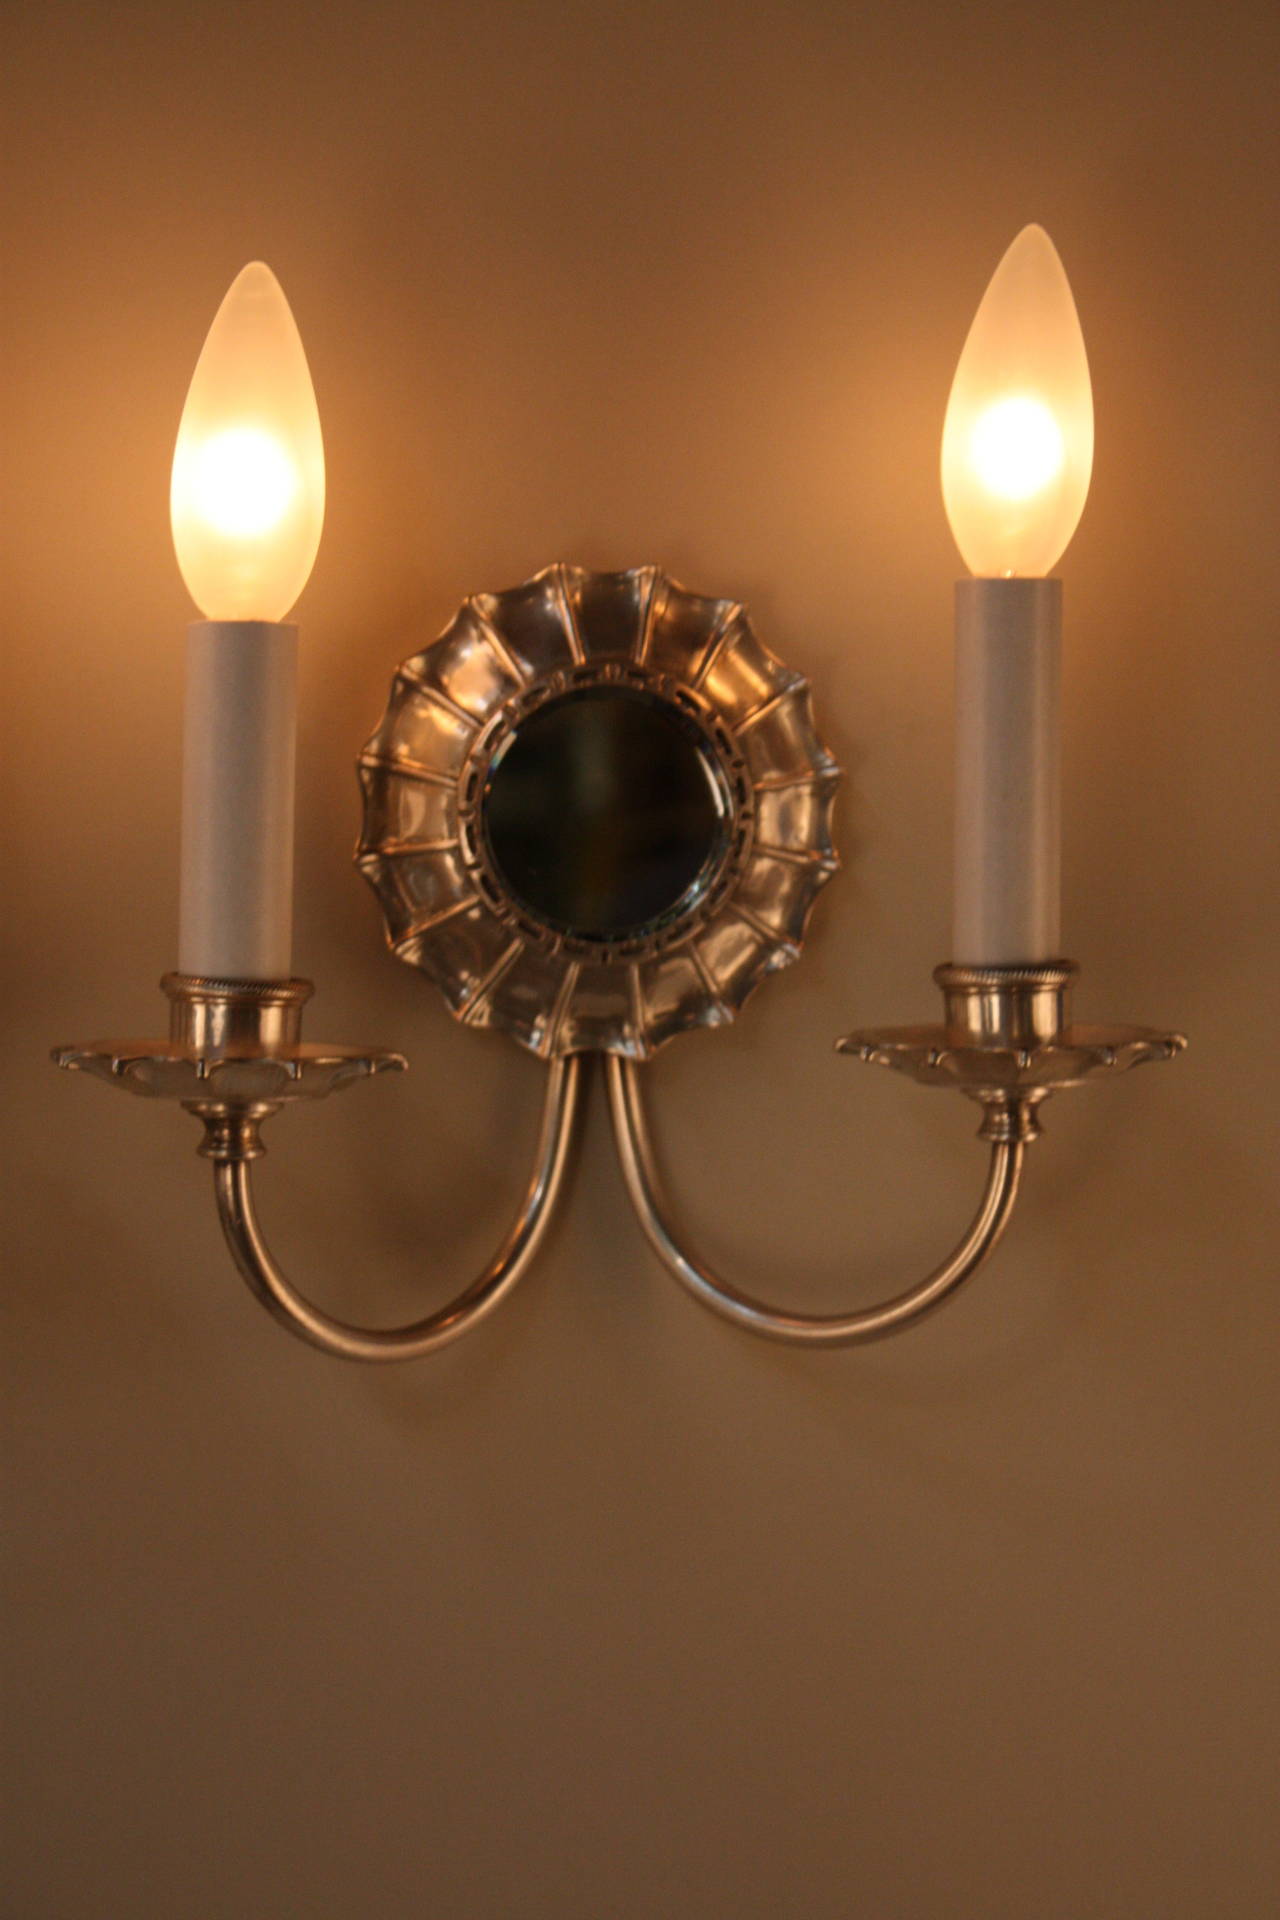 Silver on bronze wall sconces with a beveled mirror in the center. These American wall sconces have beauty and elegance. We have set of four and are sold as pair only.